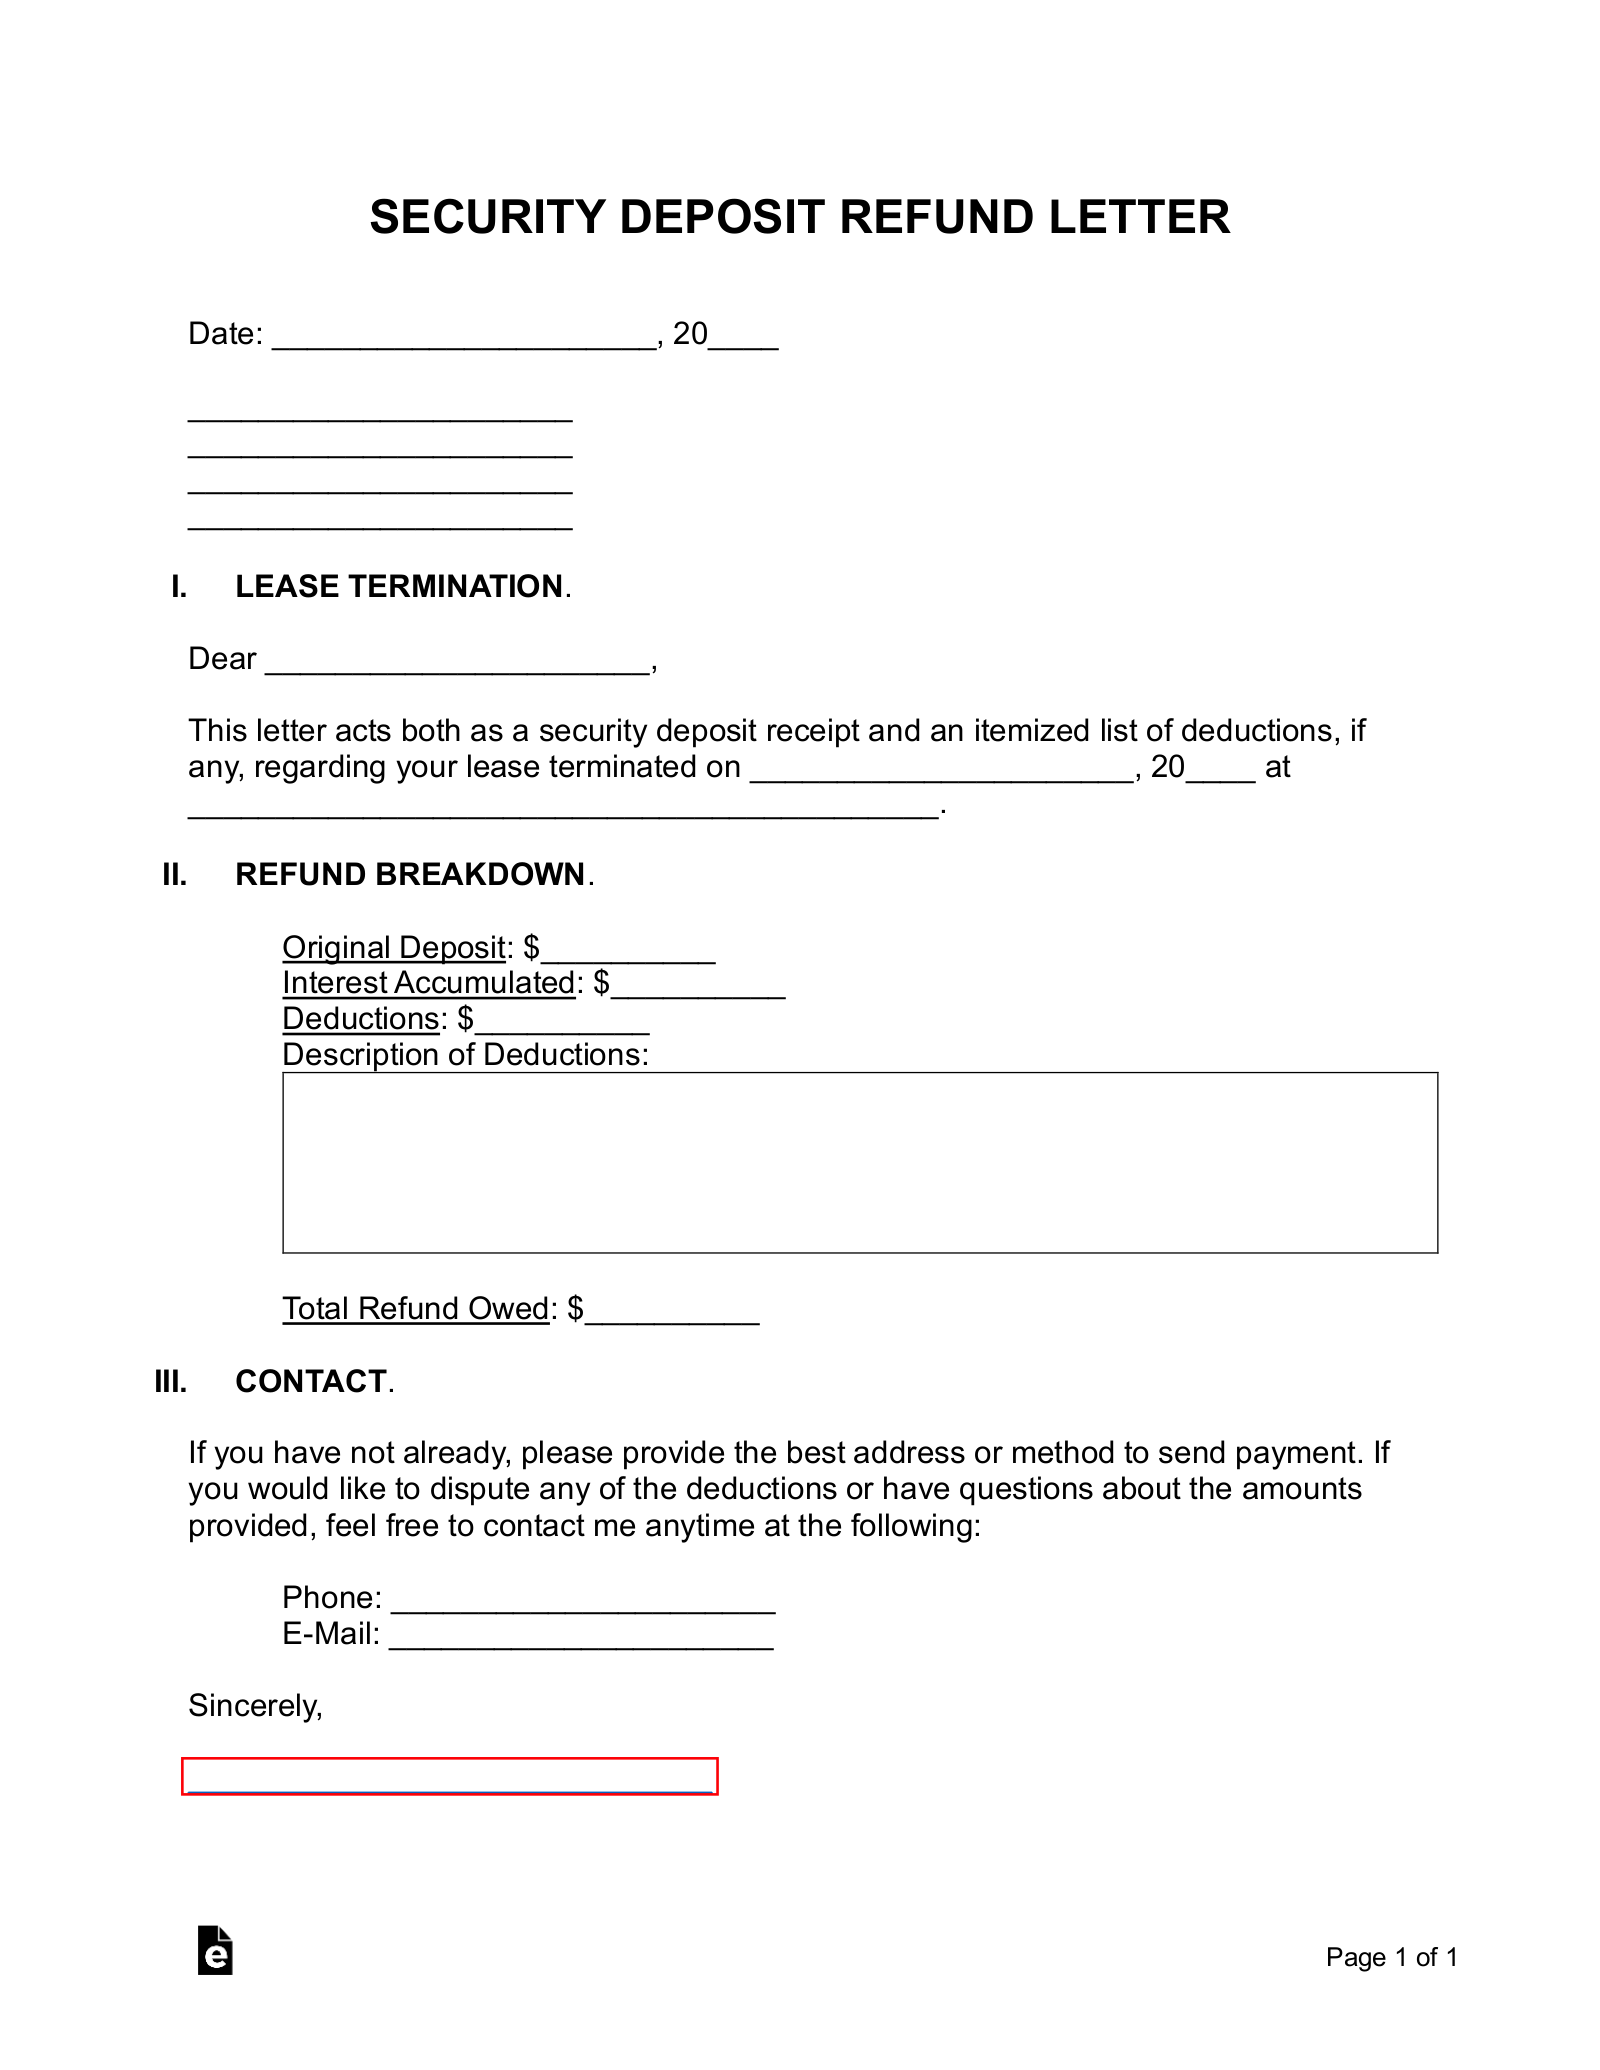 Sample Letter To Tenant To Keep Property Clean from eforms.com